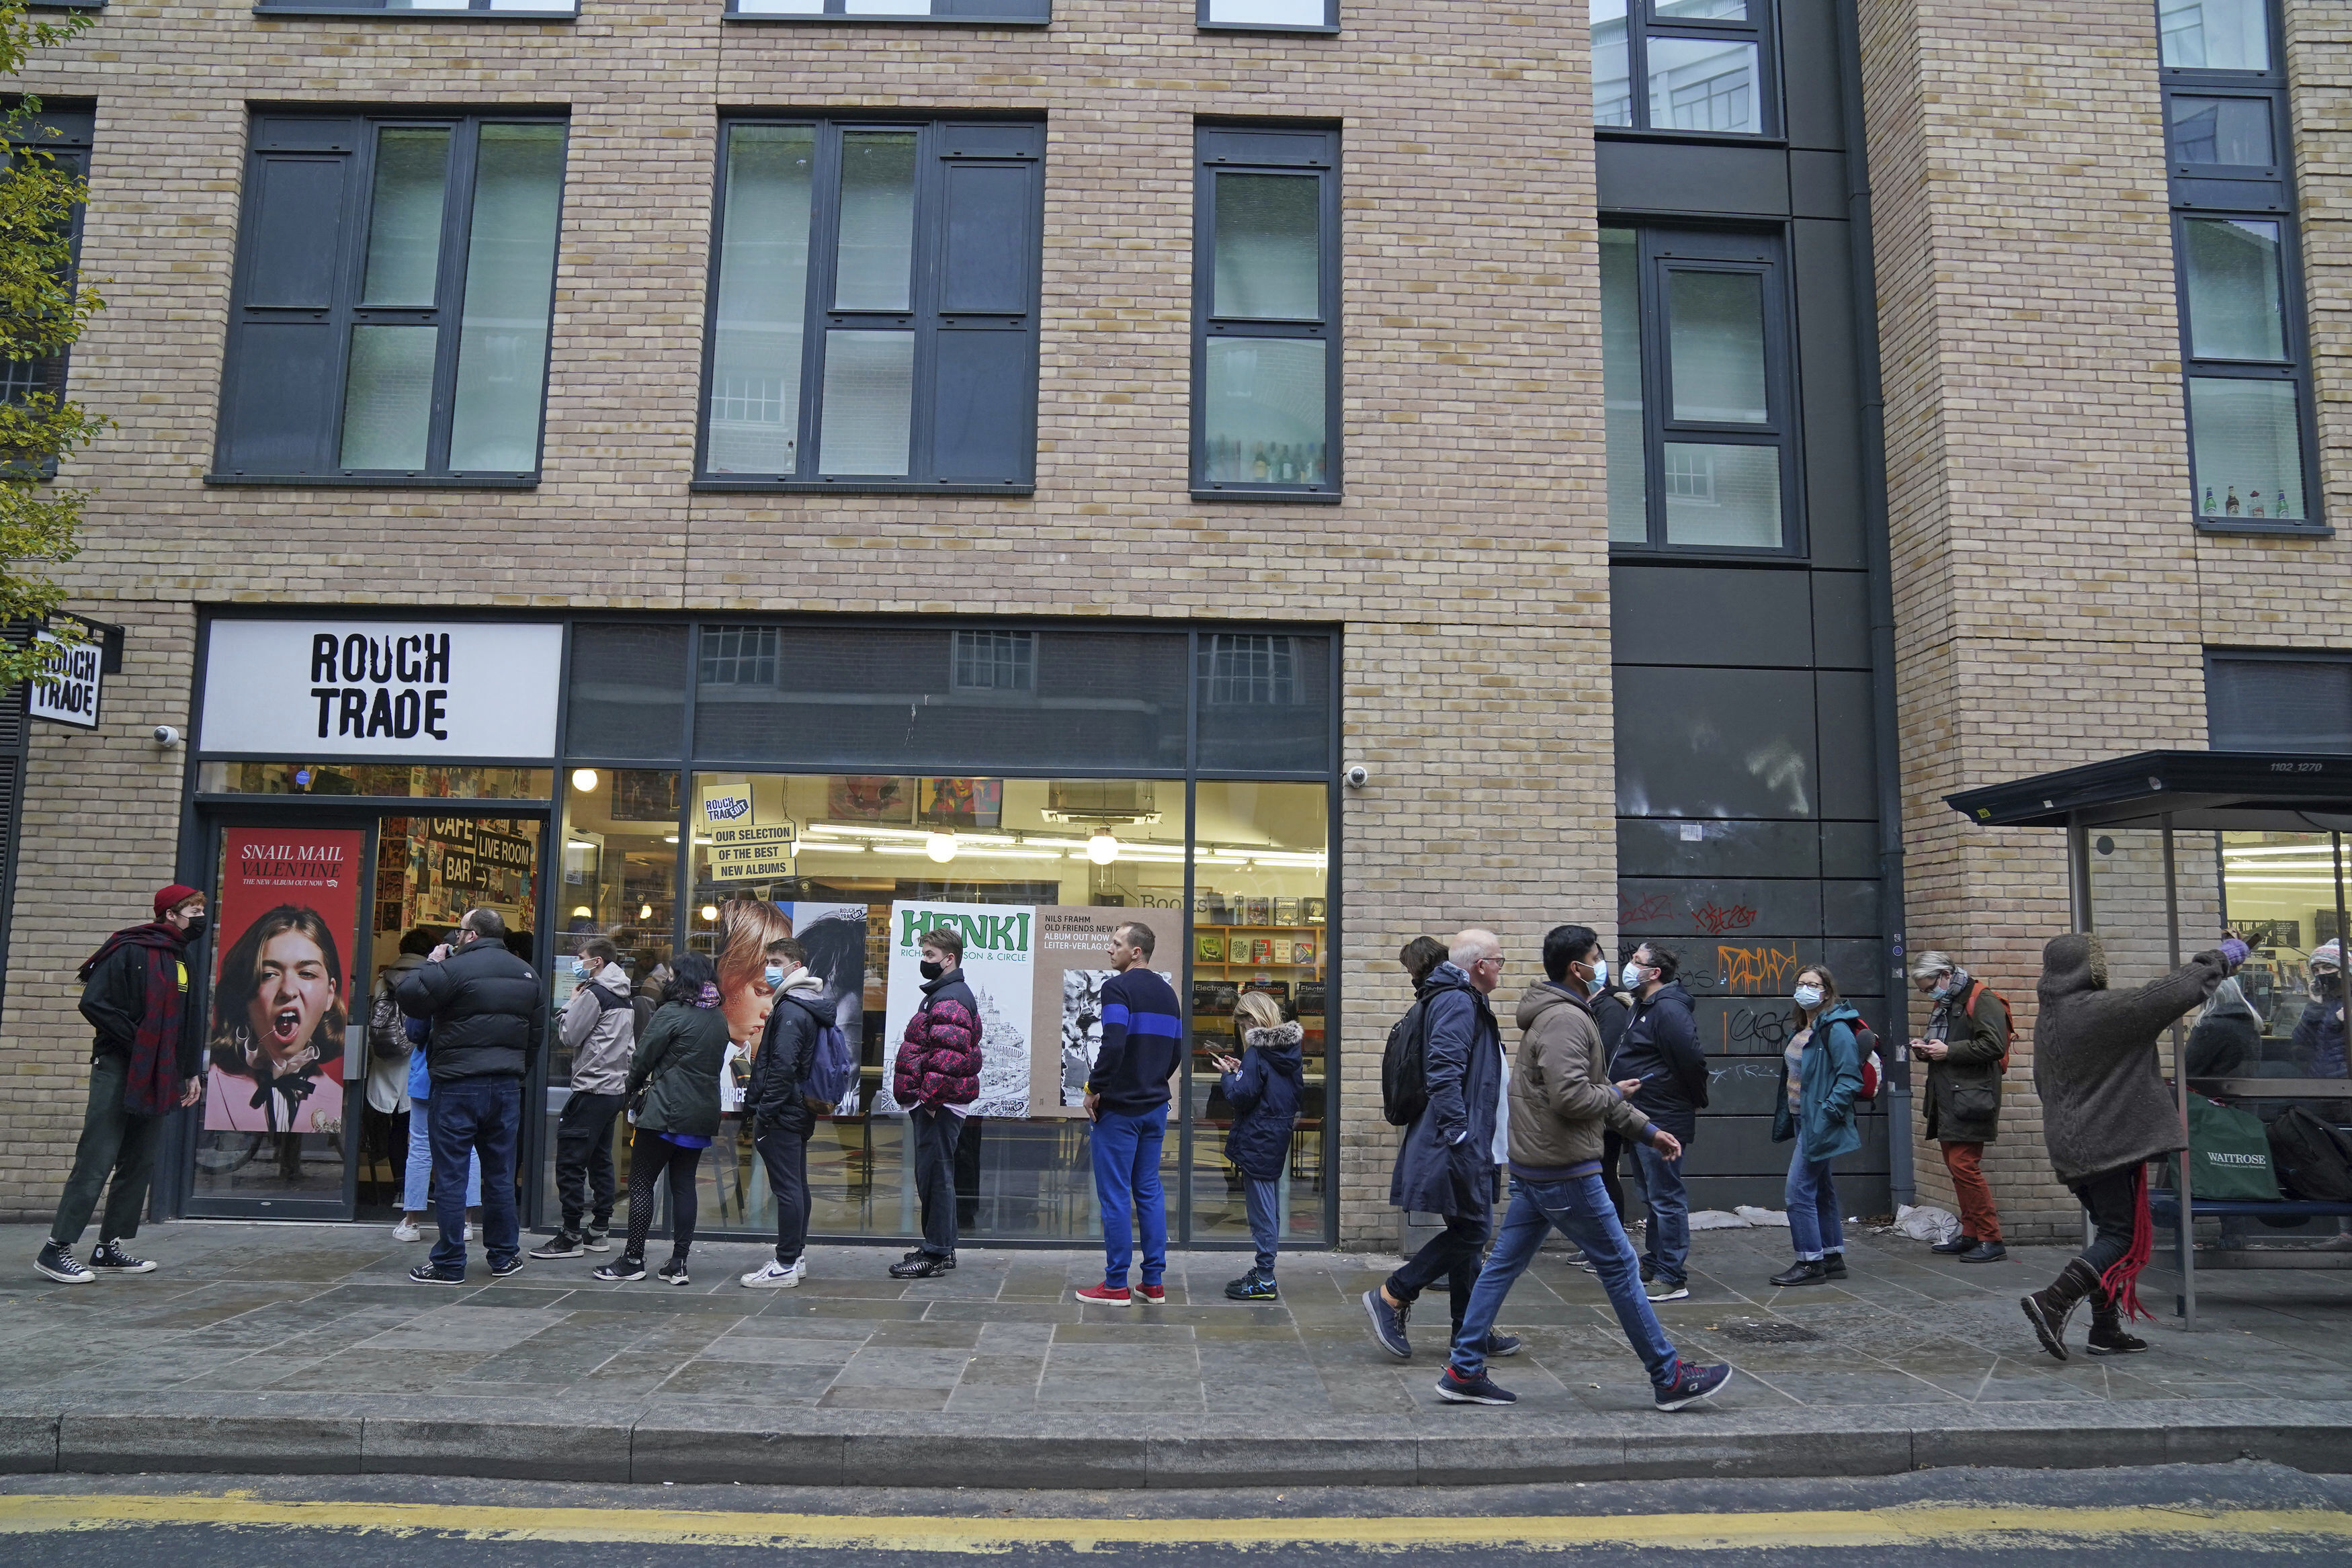 People queue outside Rough Trade in Bristol, England, Saturday Dec. 11, 2021, where a T-shirt designed by street artist Banksy is being sold to support four people facing trial accused of criminal damage in relation to the toppling of a statue of slave trader Edward Colston